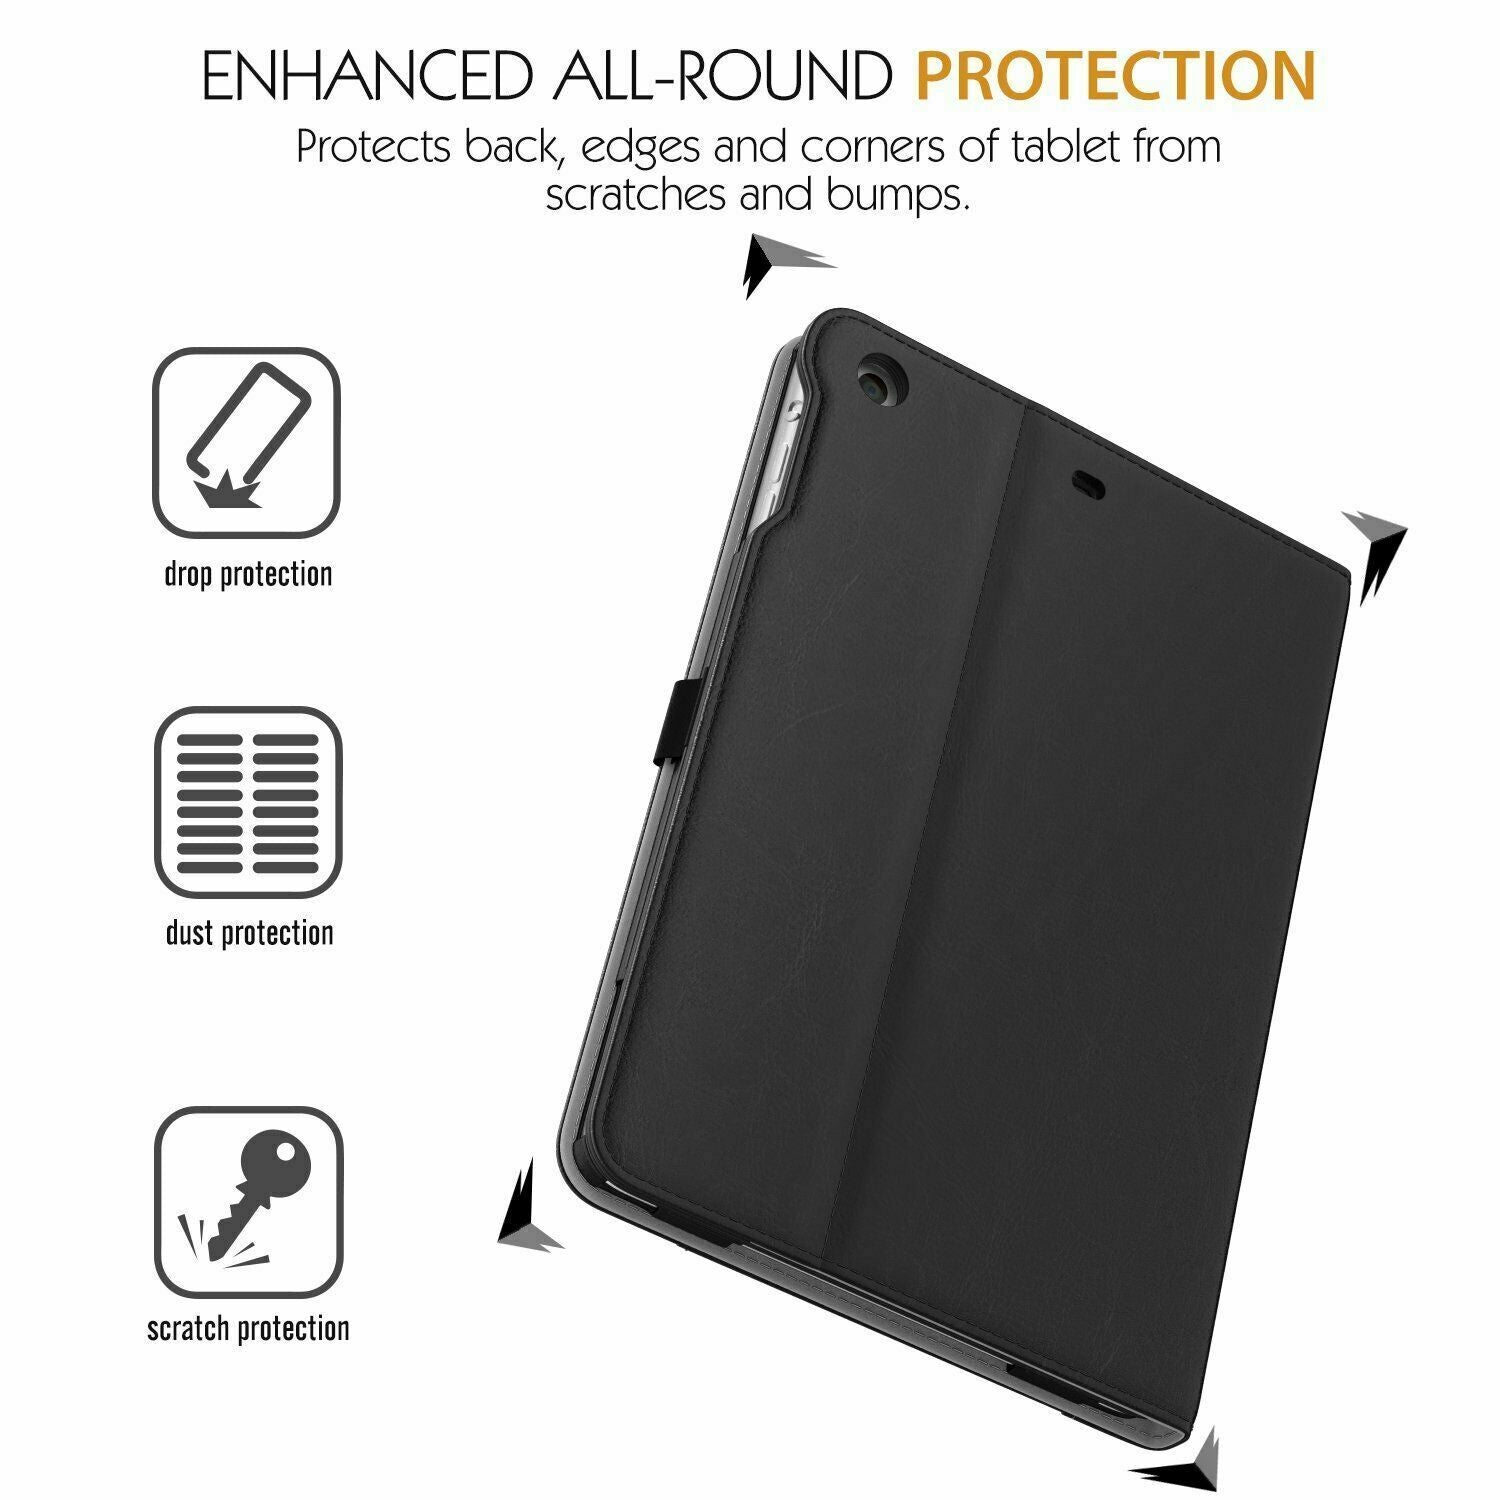 Genuine Leather BLACK TAN Smart Stand Case Cover For iPad 10.2 (10th Gen)